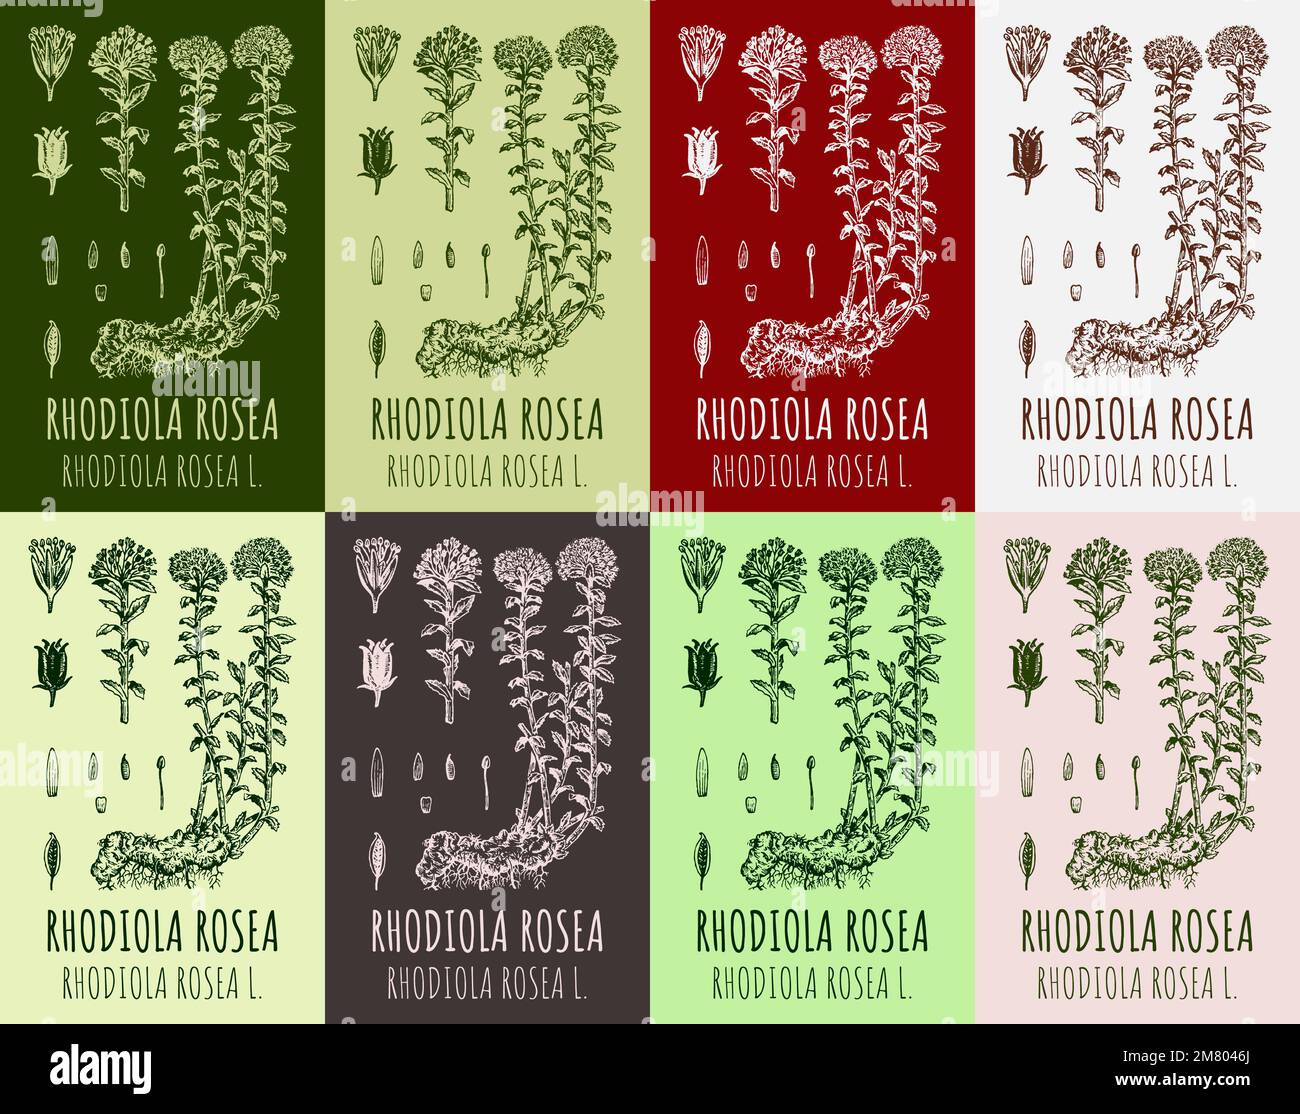 Set of vector drawings Rhodiola rosea in different colors. Hand drawn illustration. Latin name RHODIOLA ROSEA L. Stock Photo